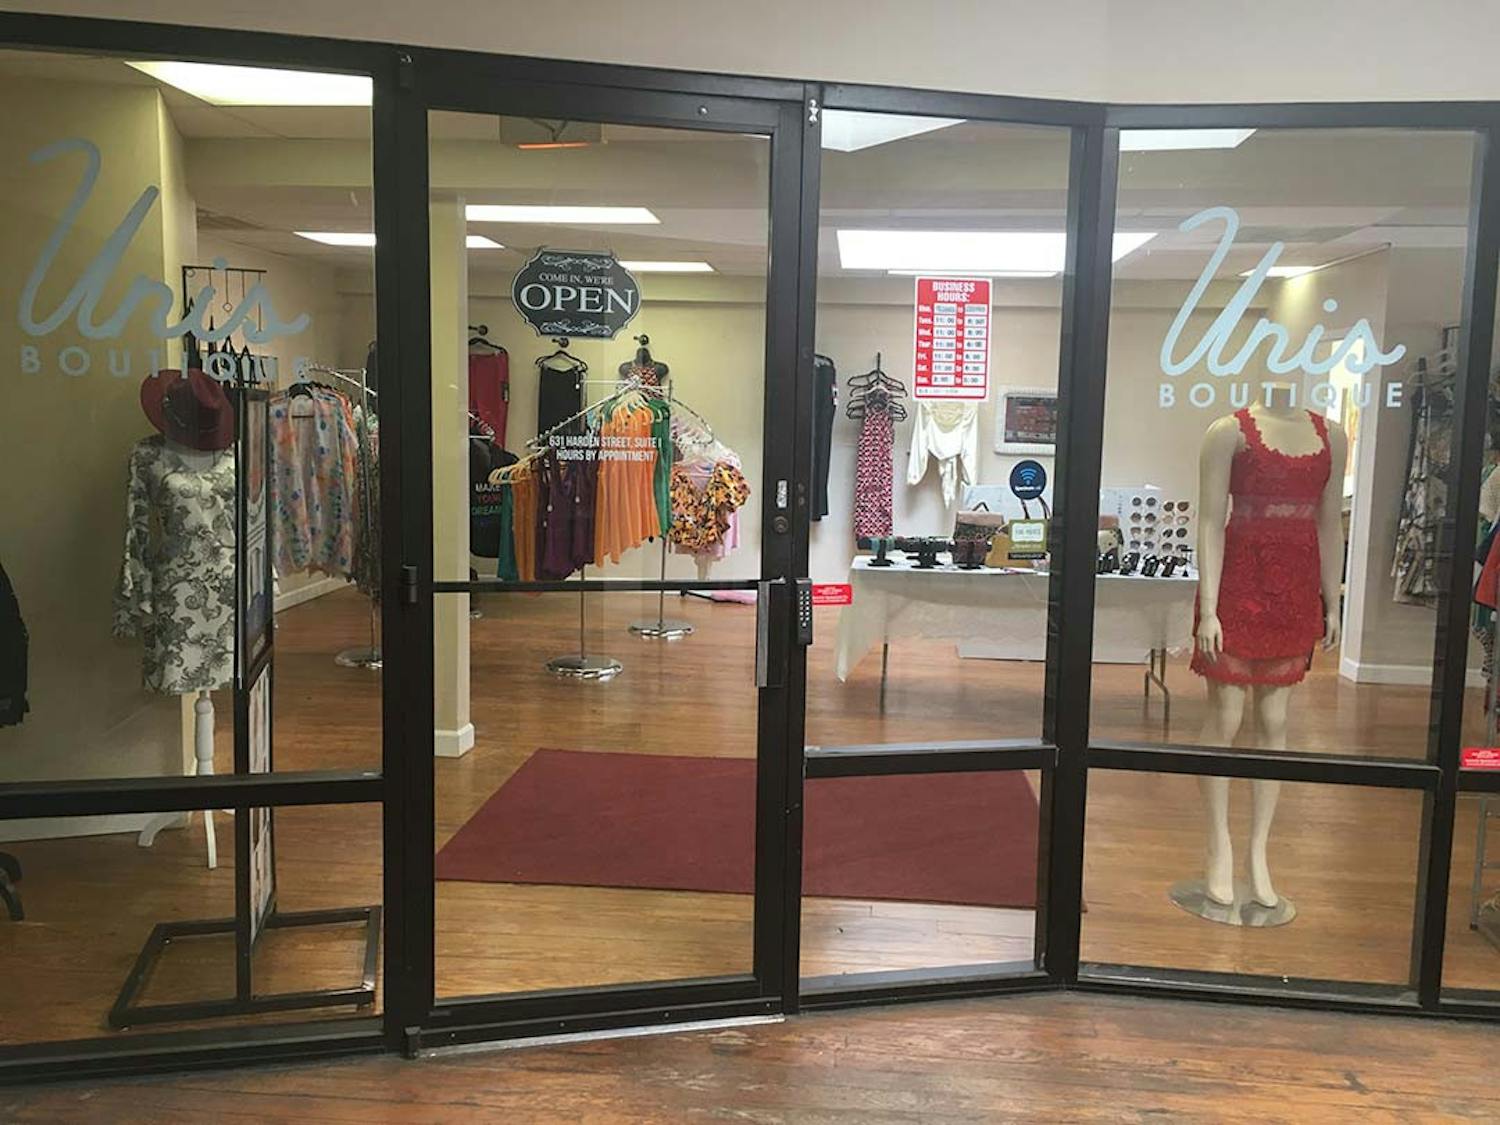 Unis Boutique offers a wide selection of clothing and accessories. It is located on 631 Harden St in Columbia, SC.